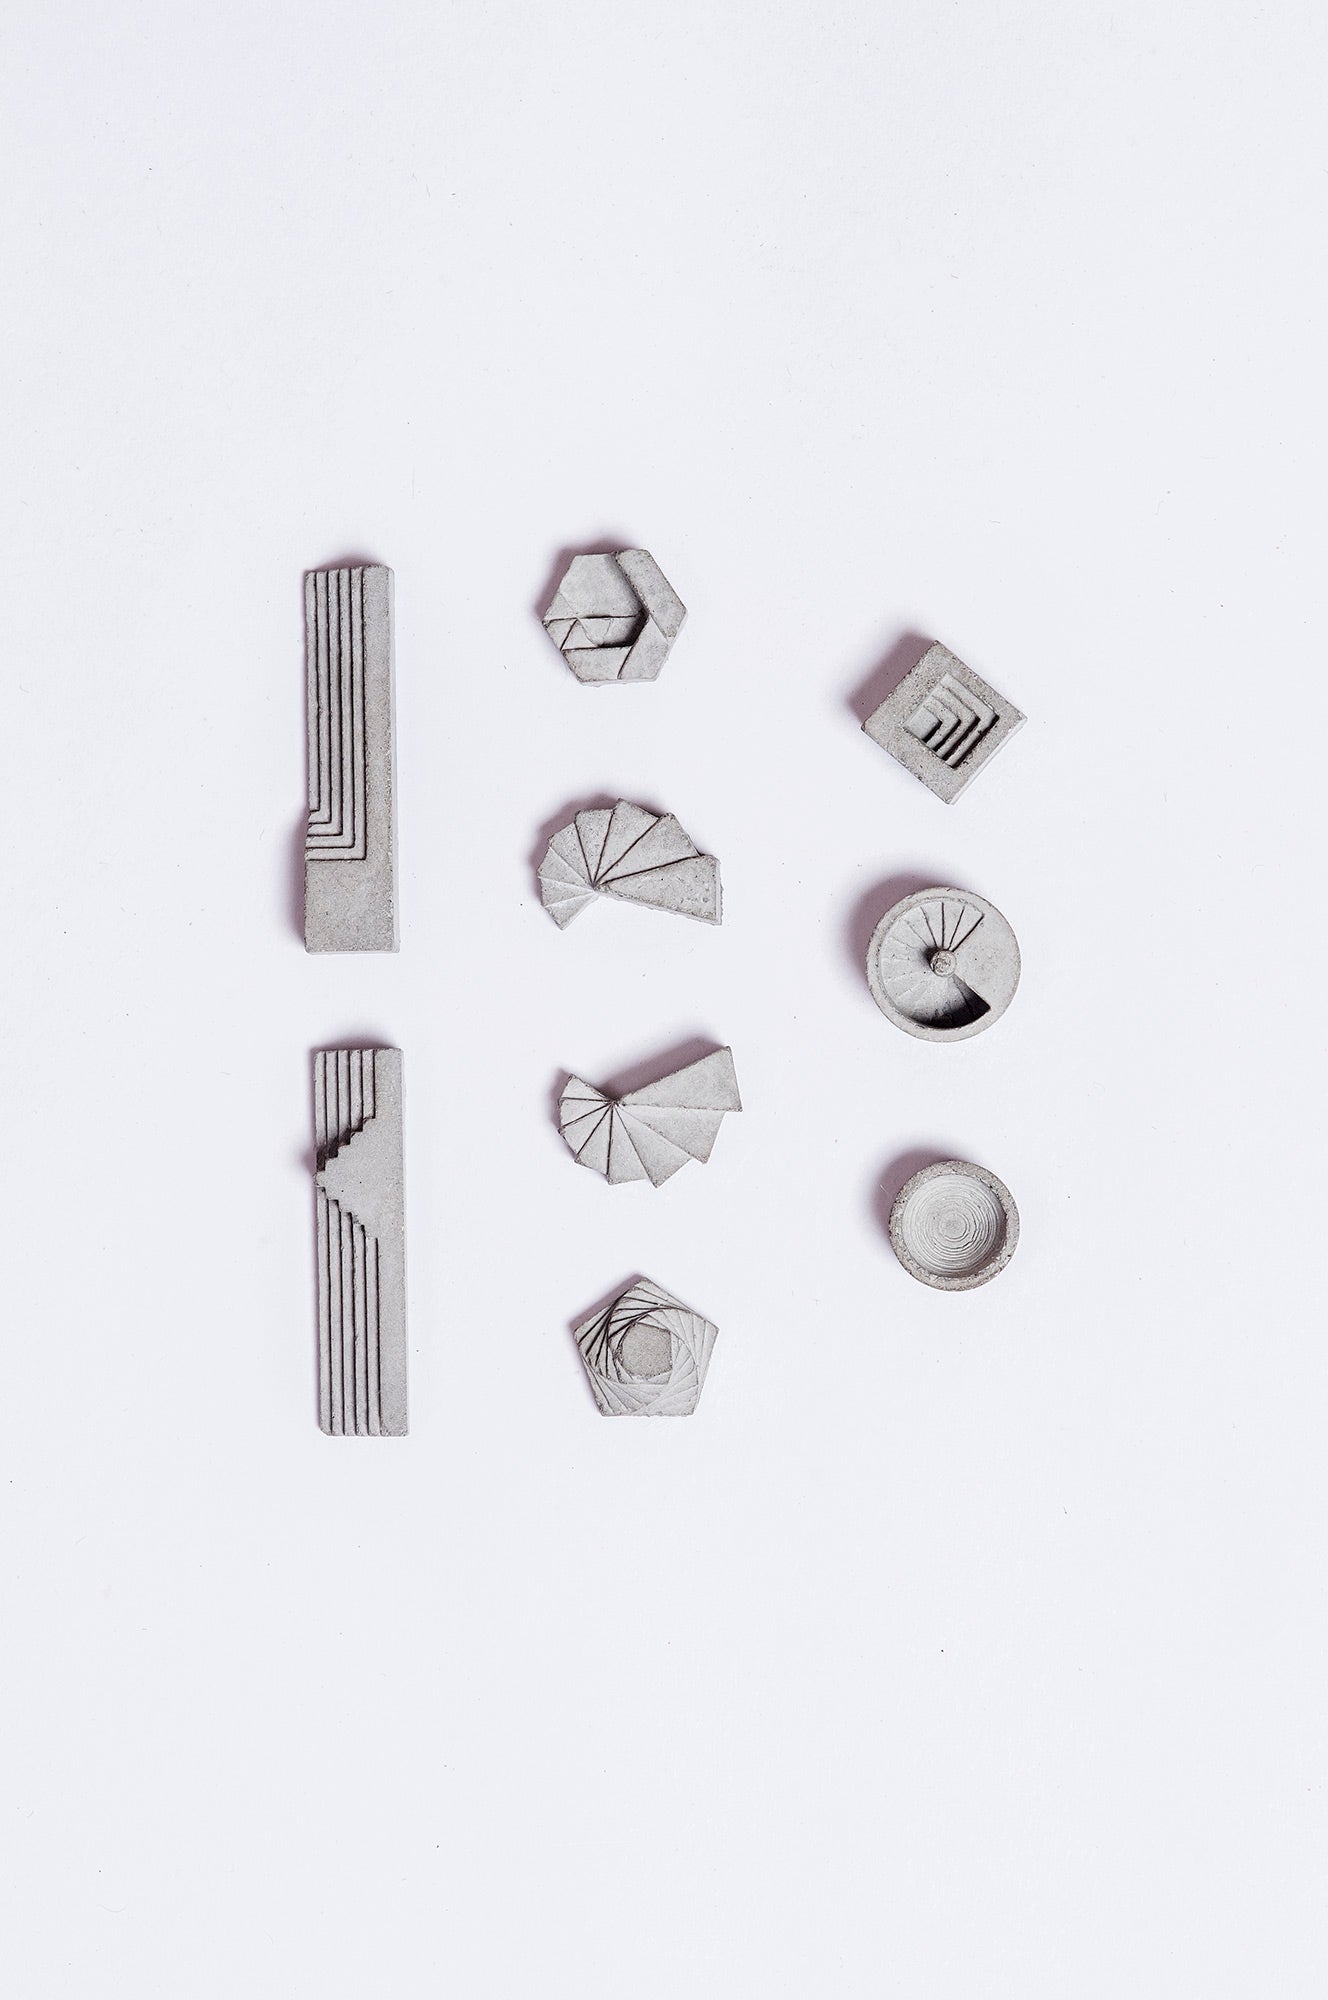 ELEMENTS Concrete Earring Collection by Material Immaterial Studio